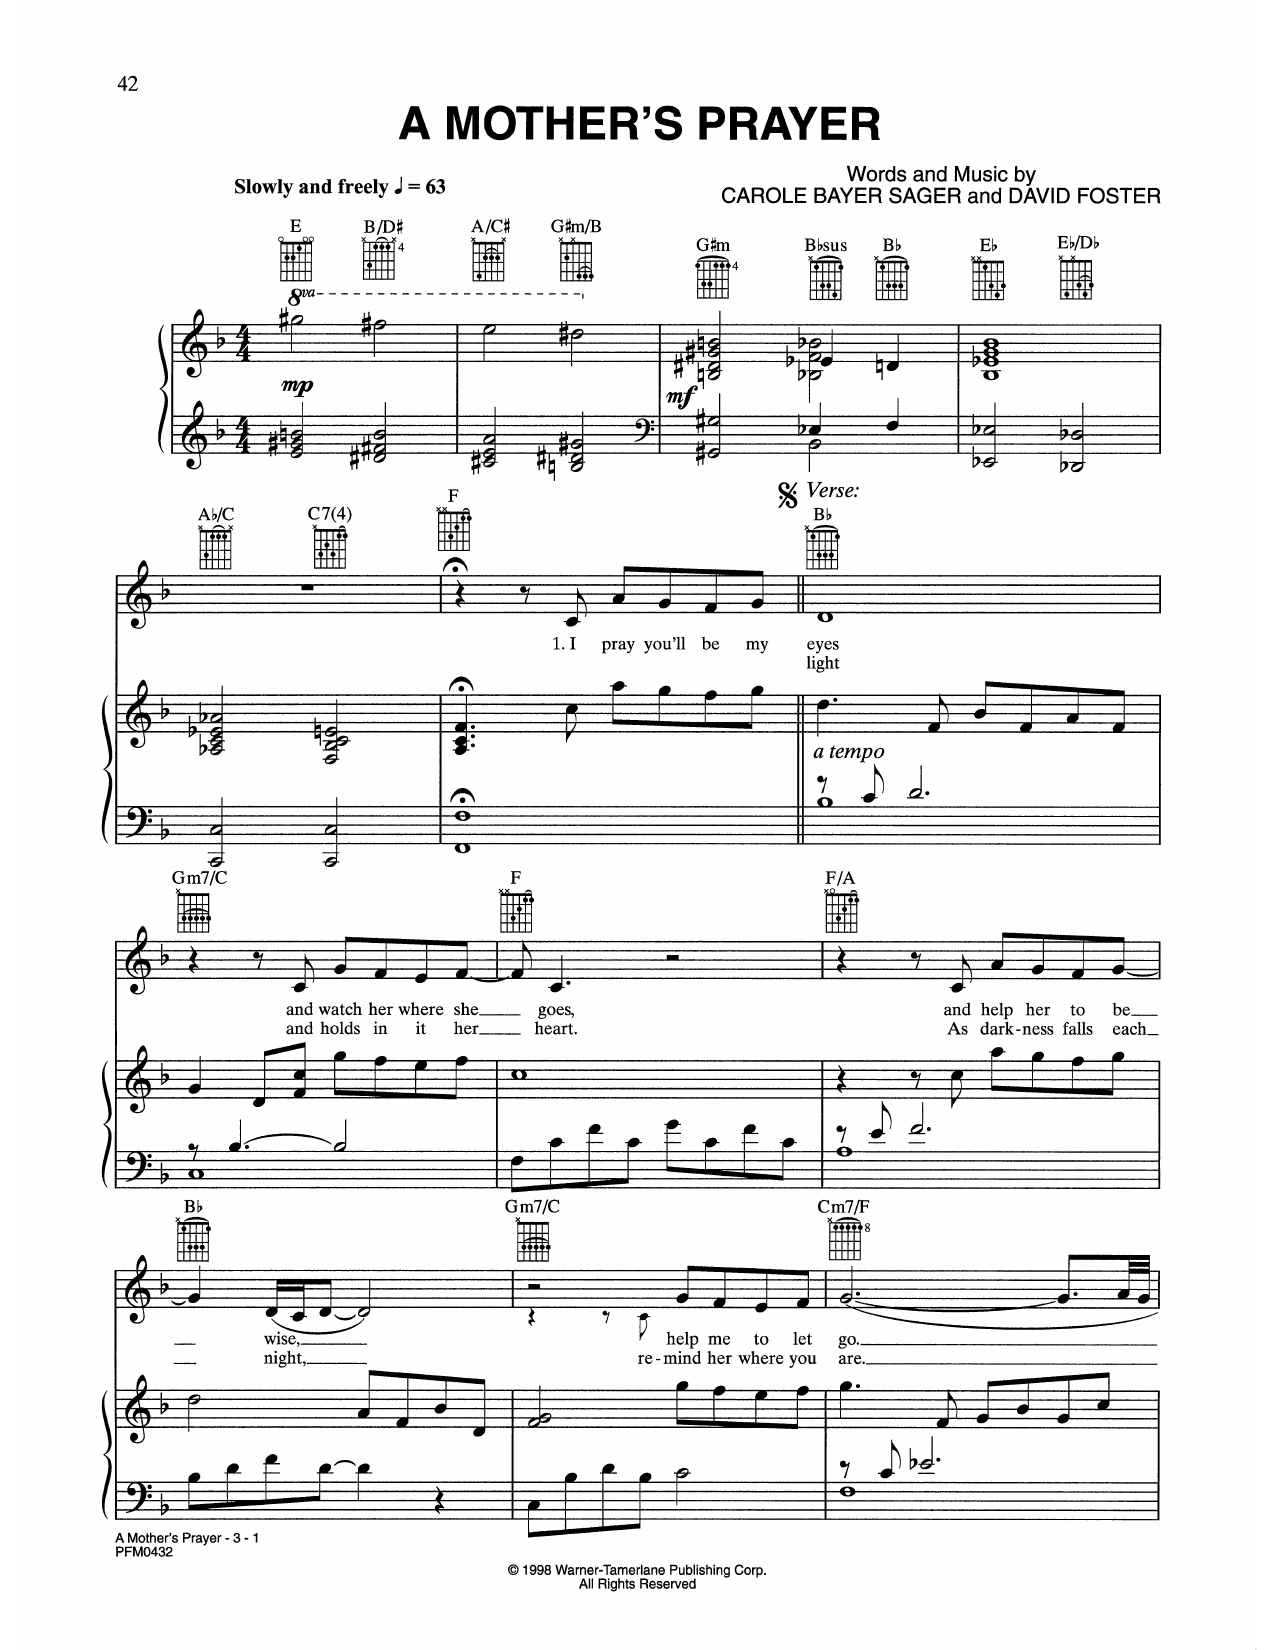 Celine Dion A Mother's Prayer (from Quest For Camelot) sheet music notes and chords. Download Printable PDF.